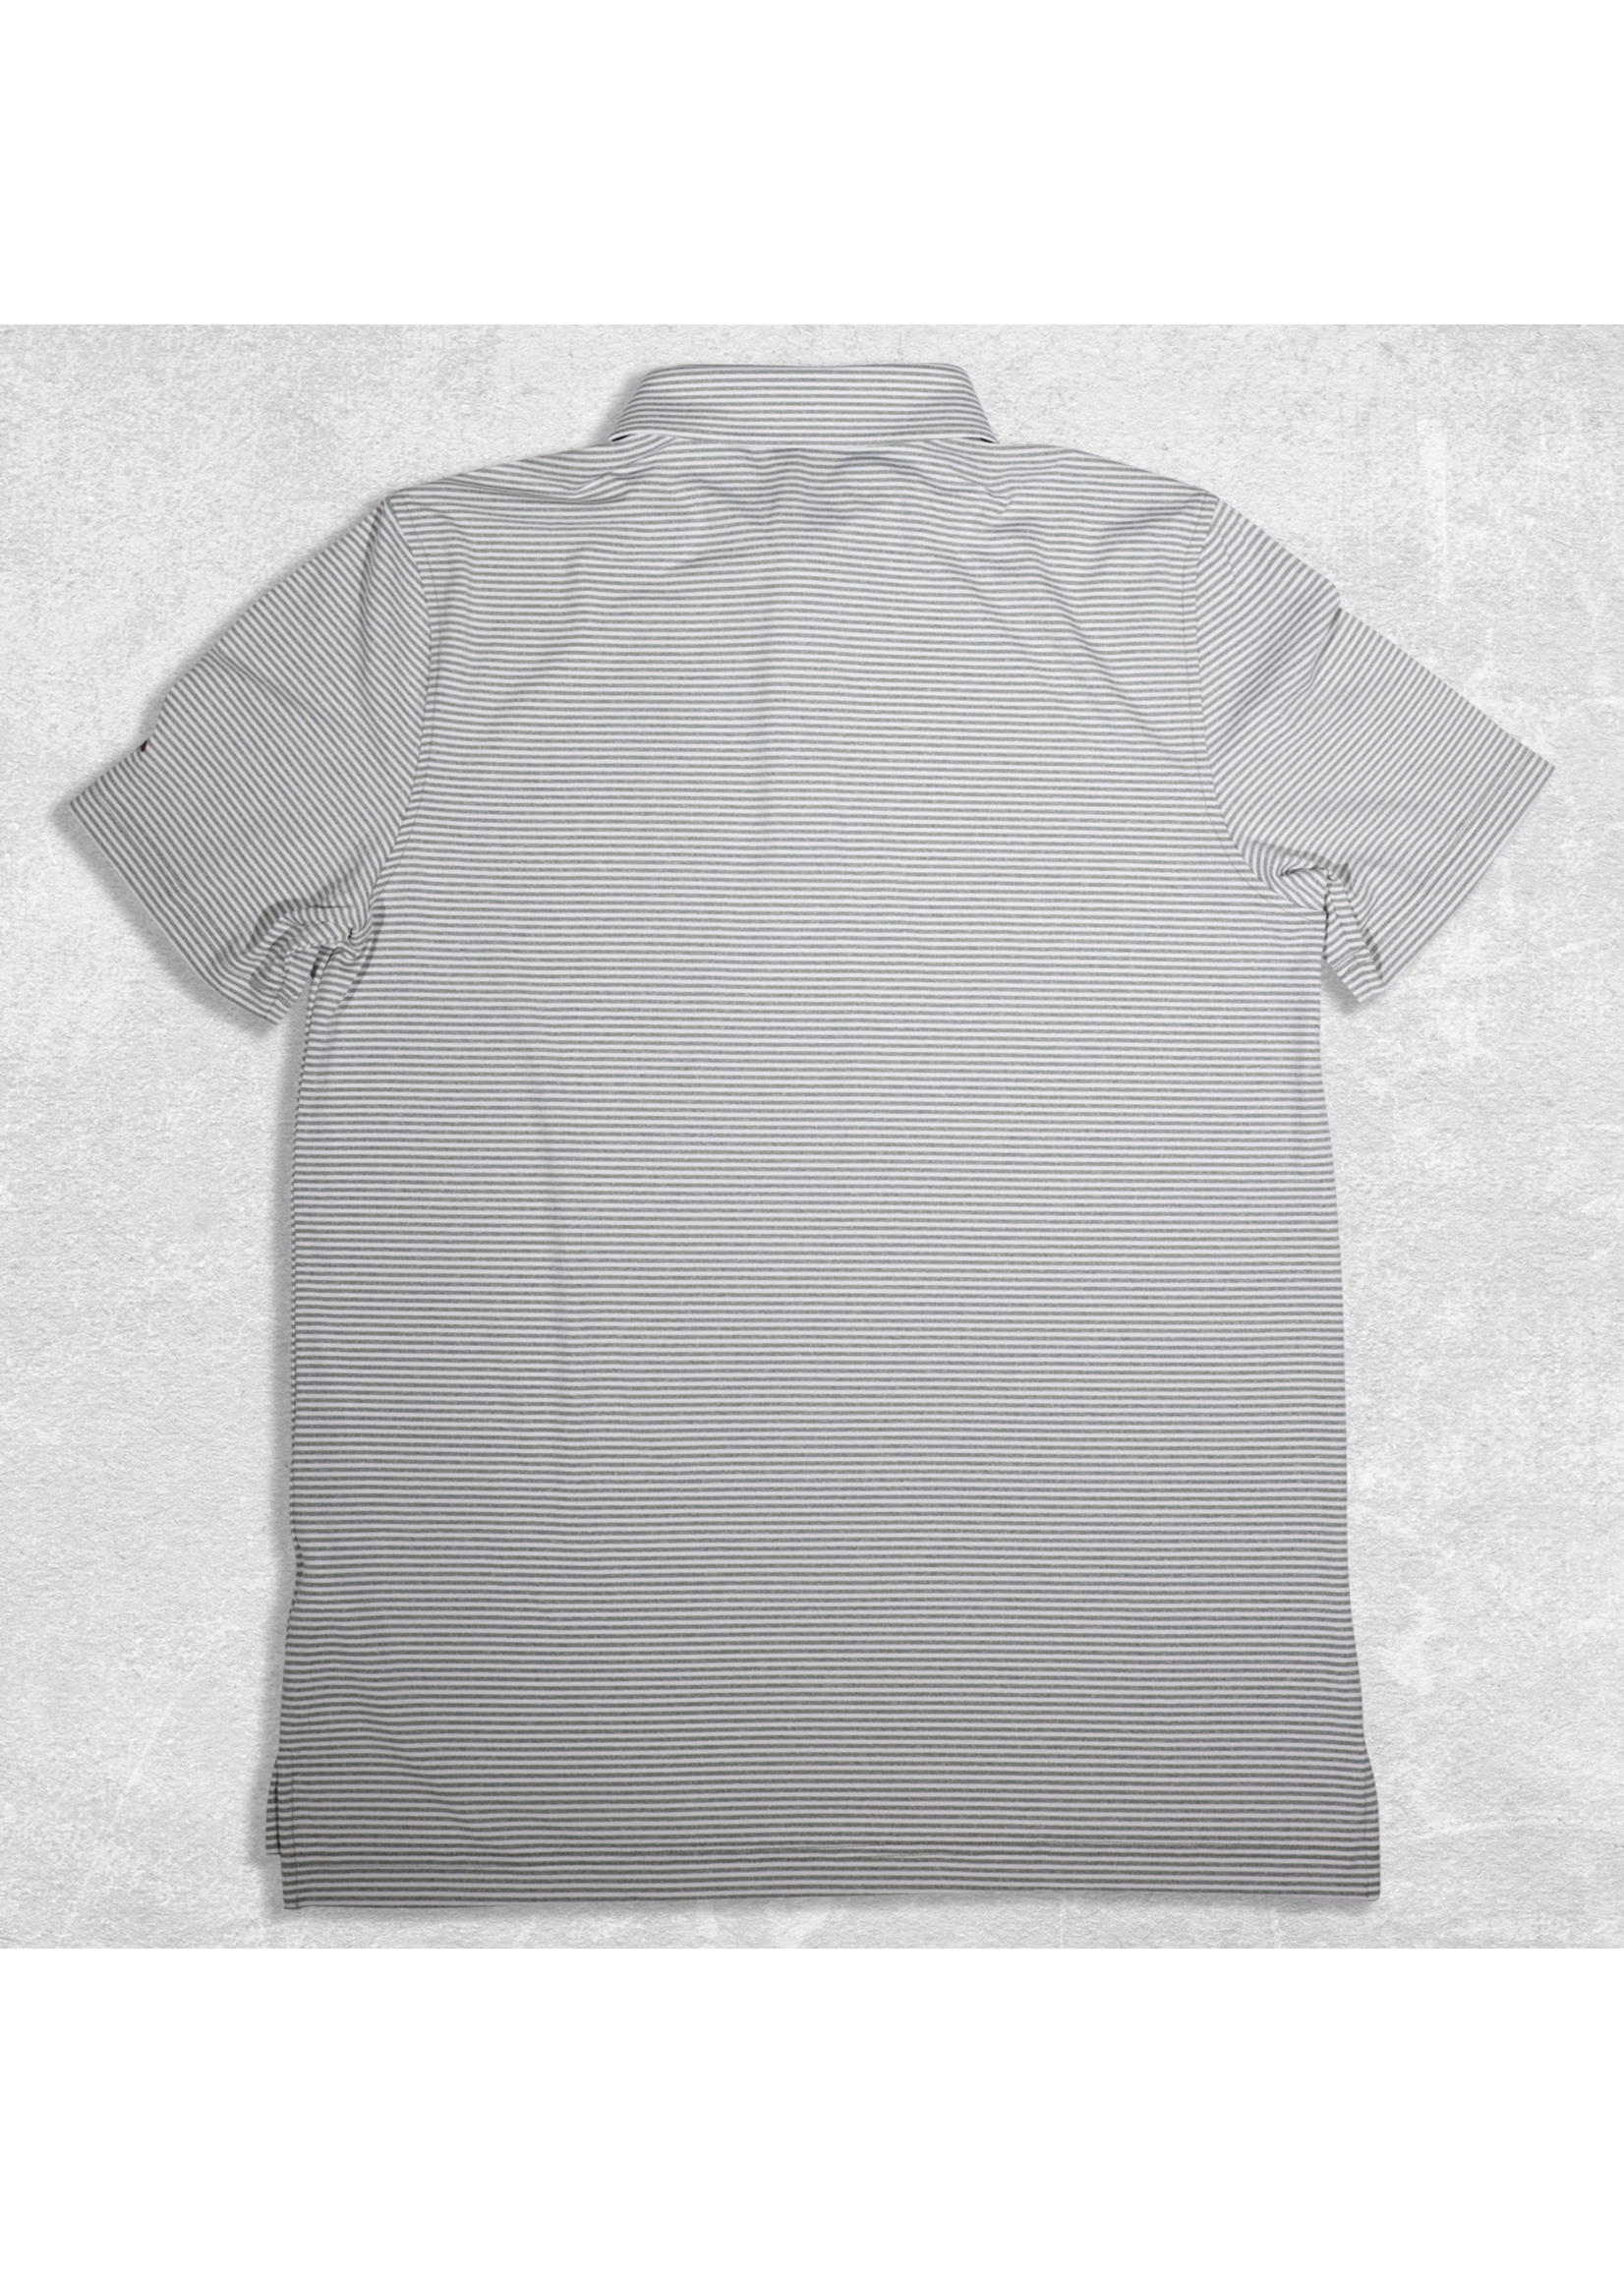 Southern Point Co. Performance Polo